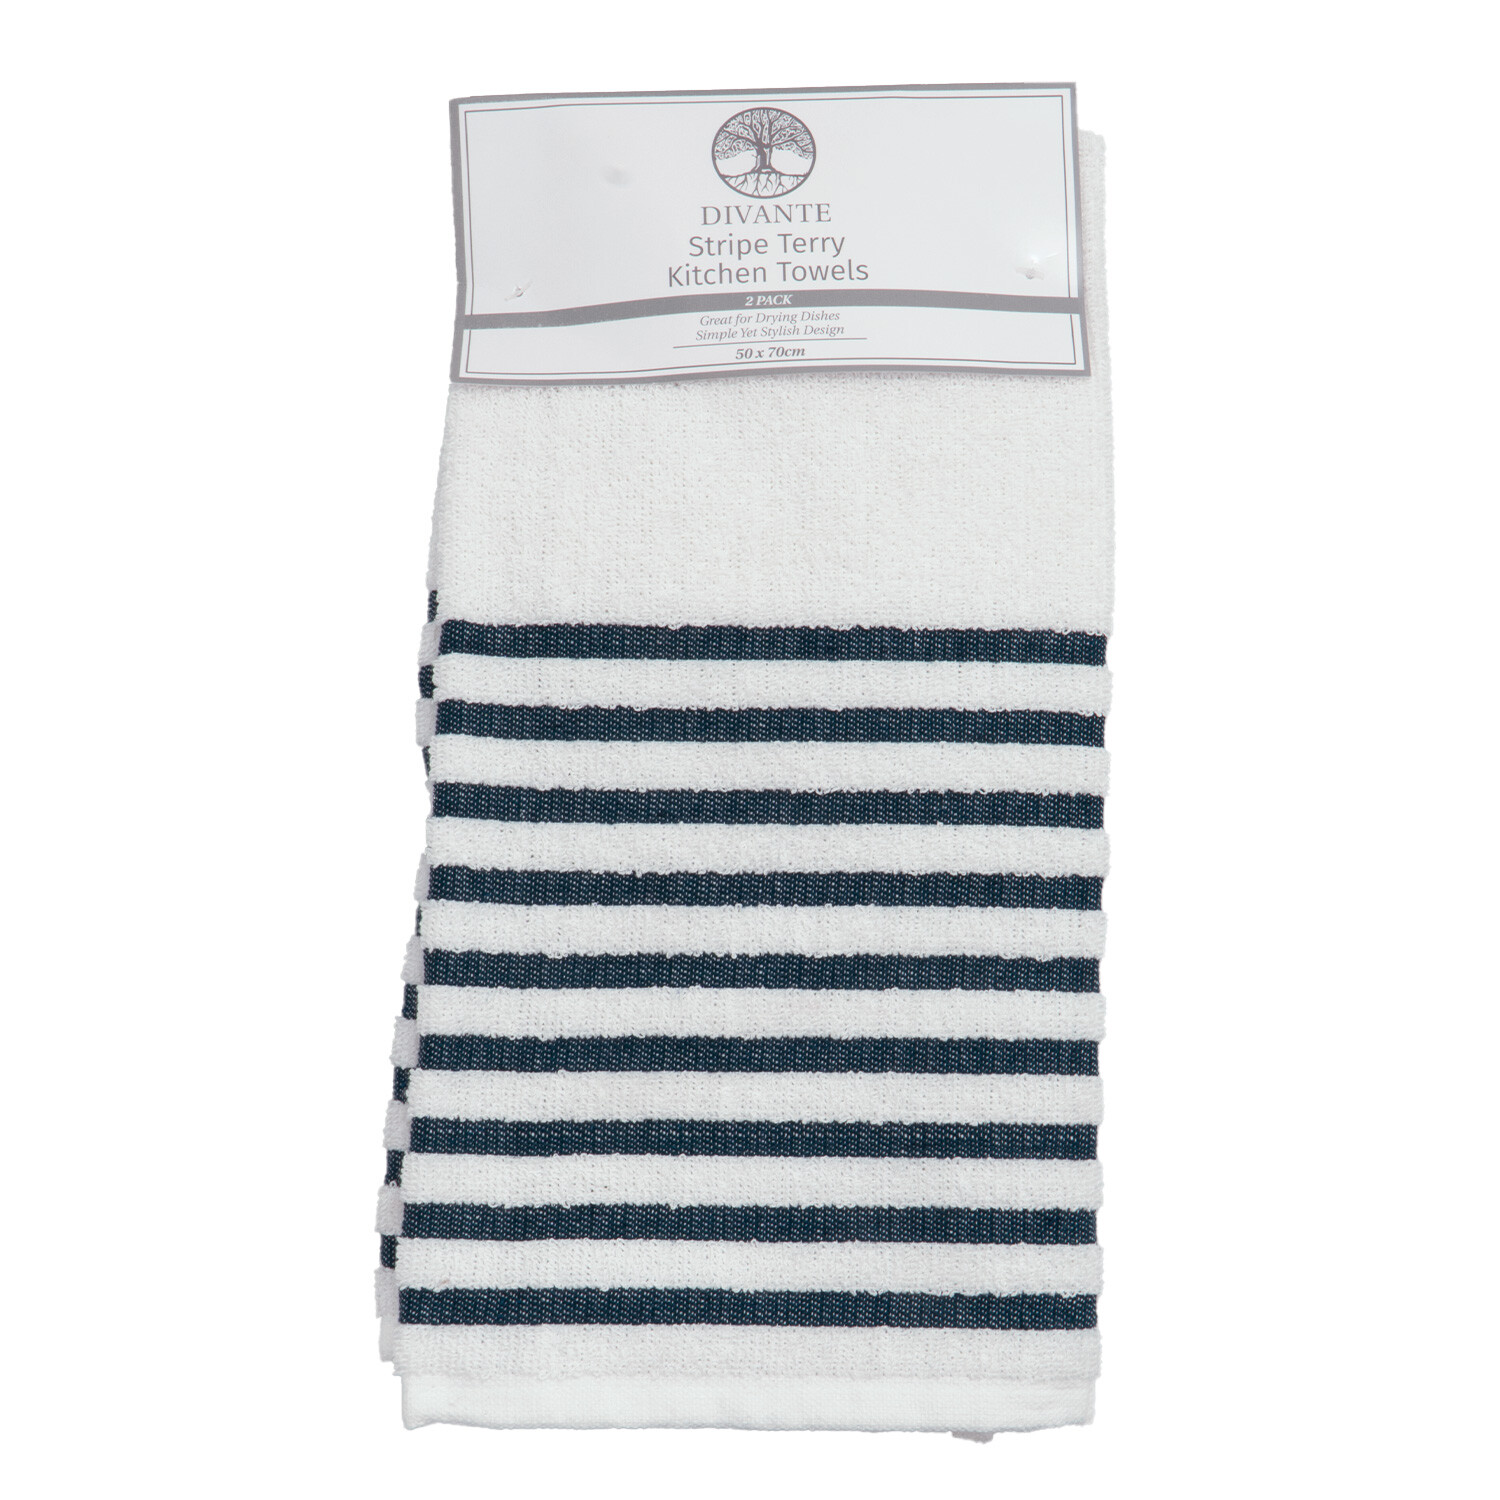 Pack of 2 Striped Terry Kitchen Towels - White & Navy Image 1